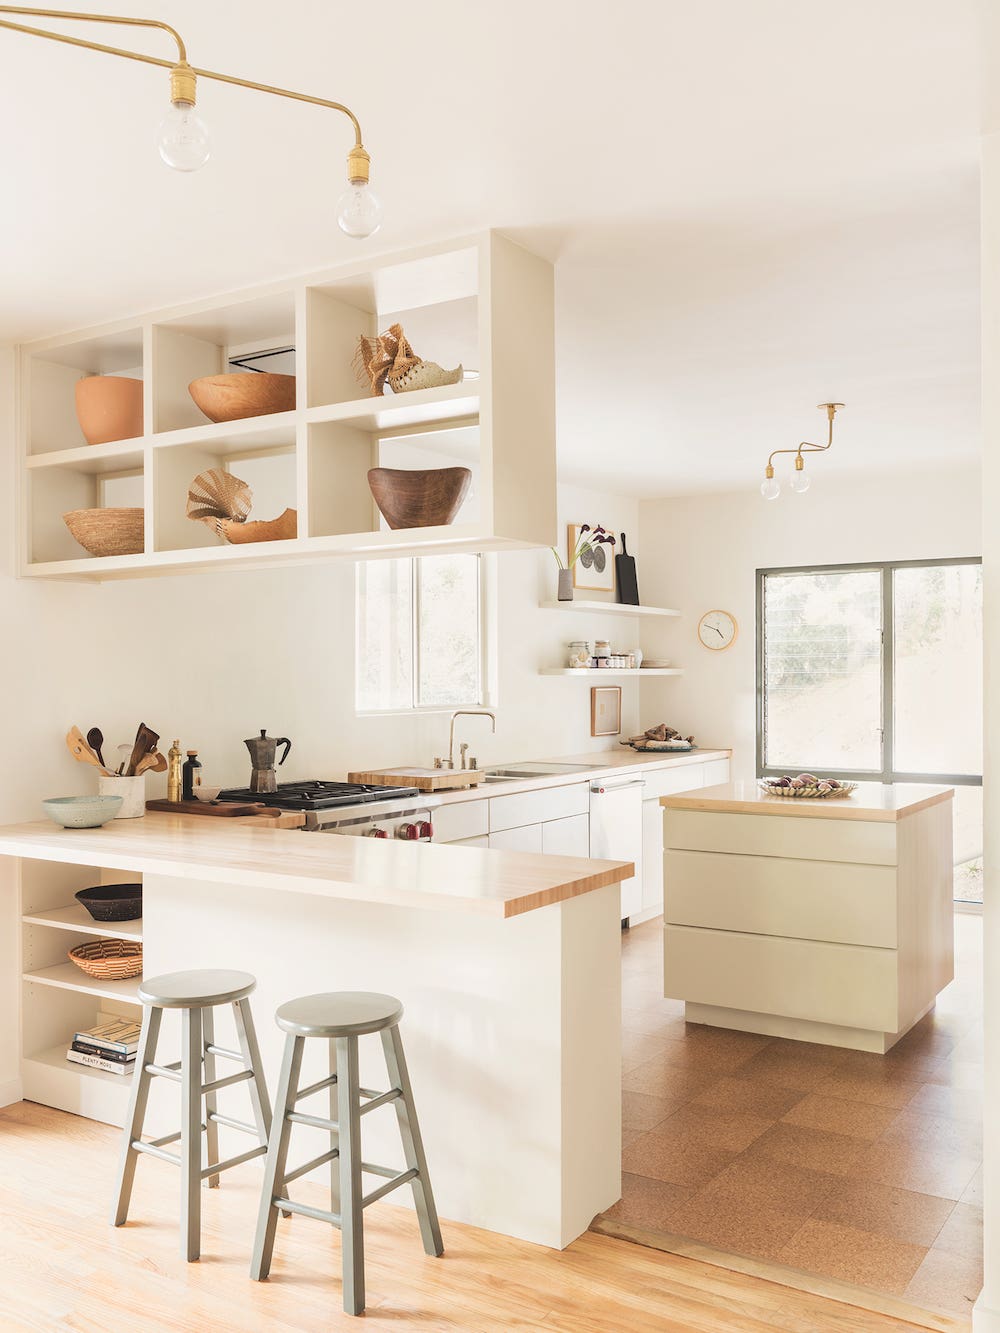 Yes, You Can Buy a Kitchen Island (With Storage!) From CB2